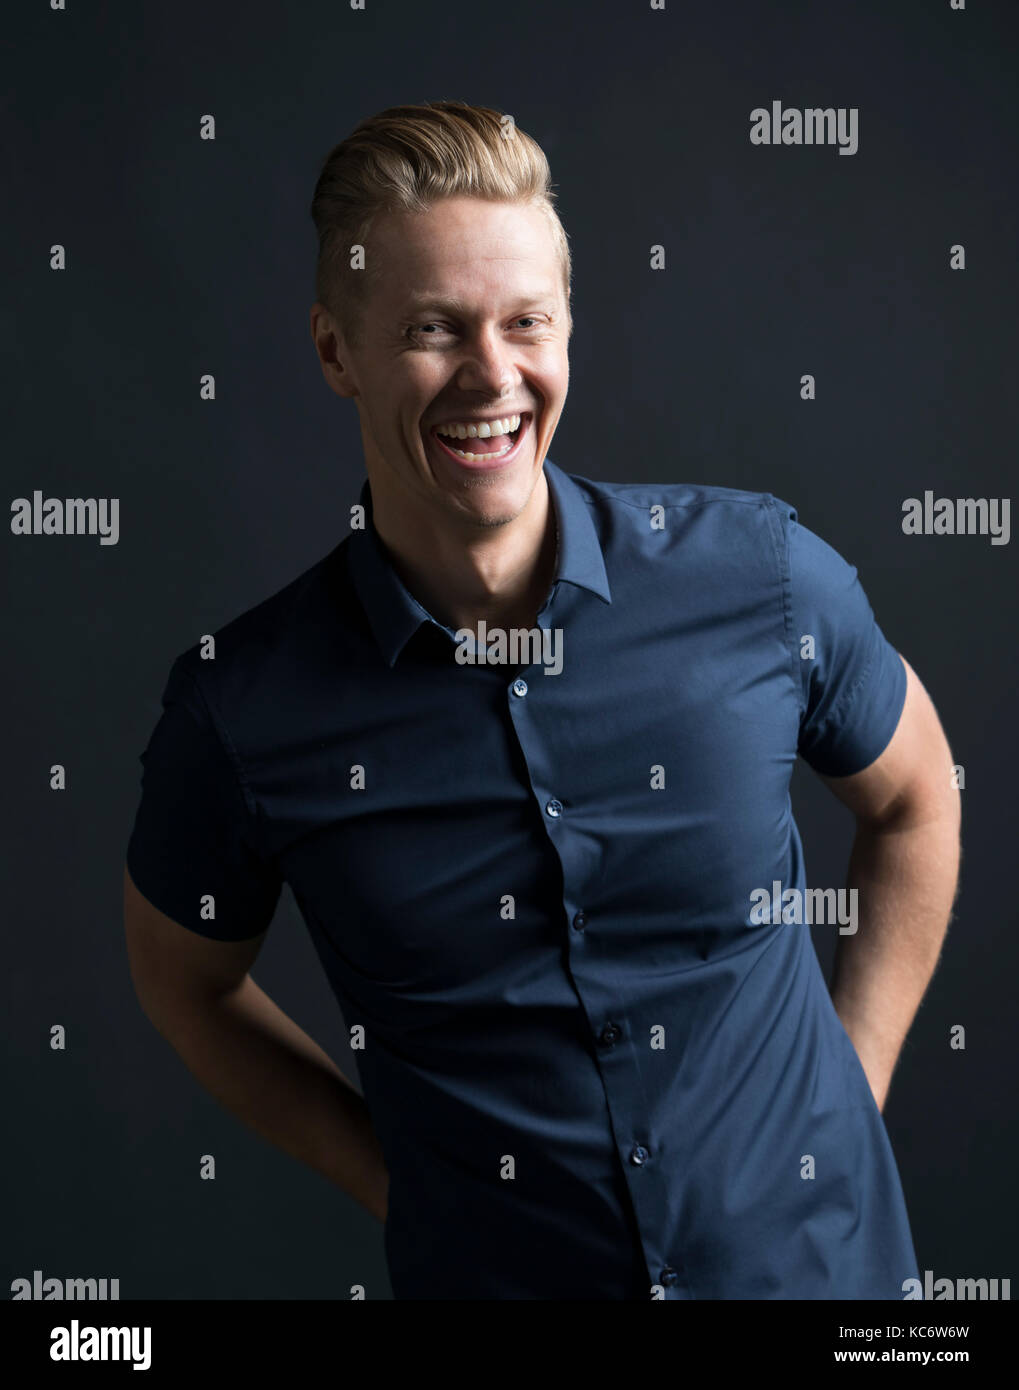 Portrait of blond man laughing Stock Photo